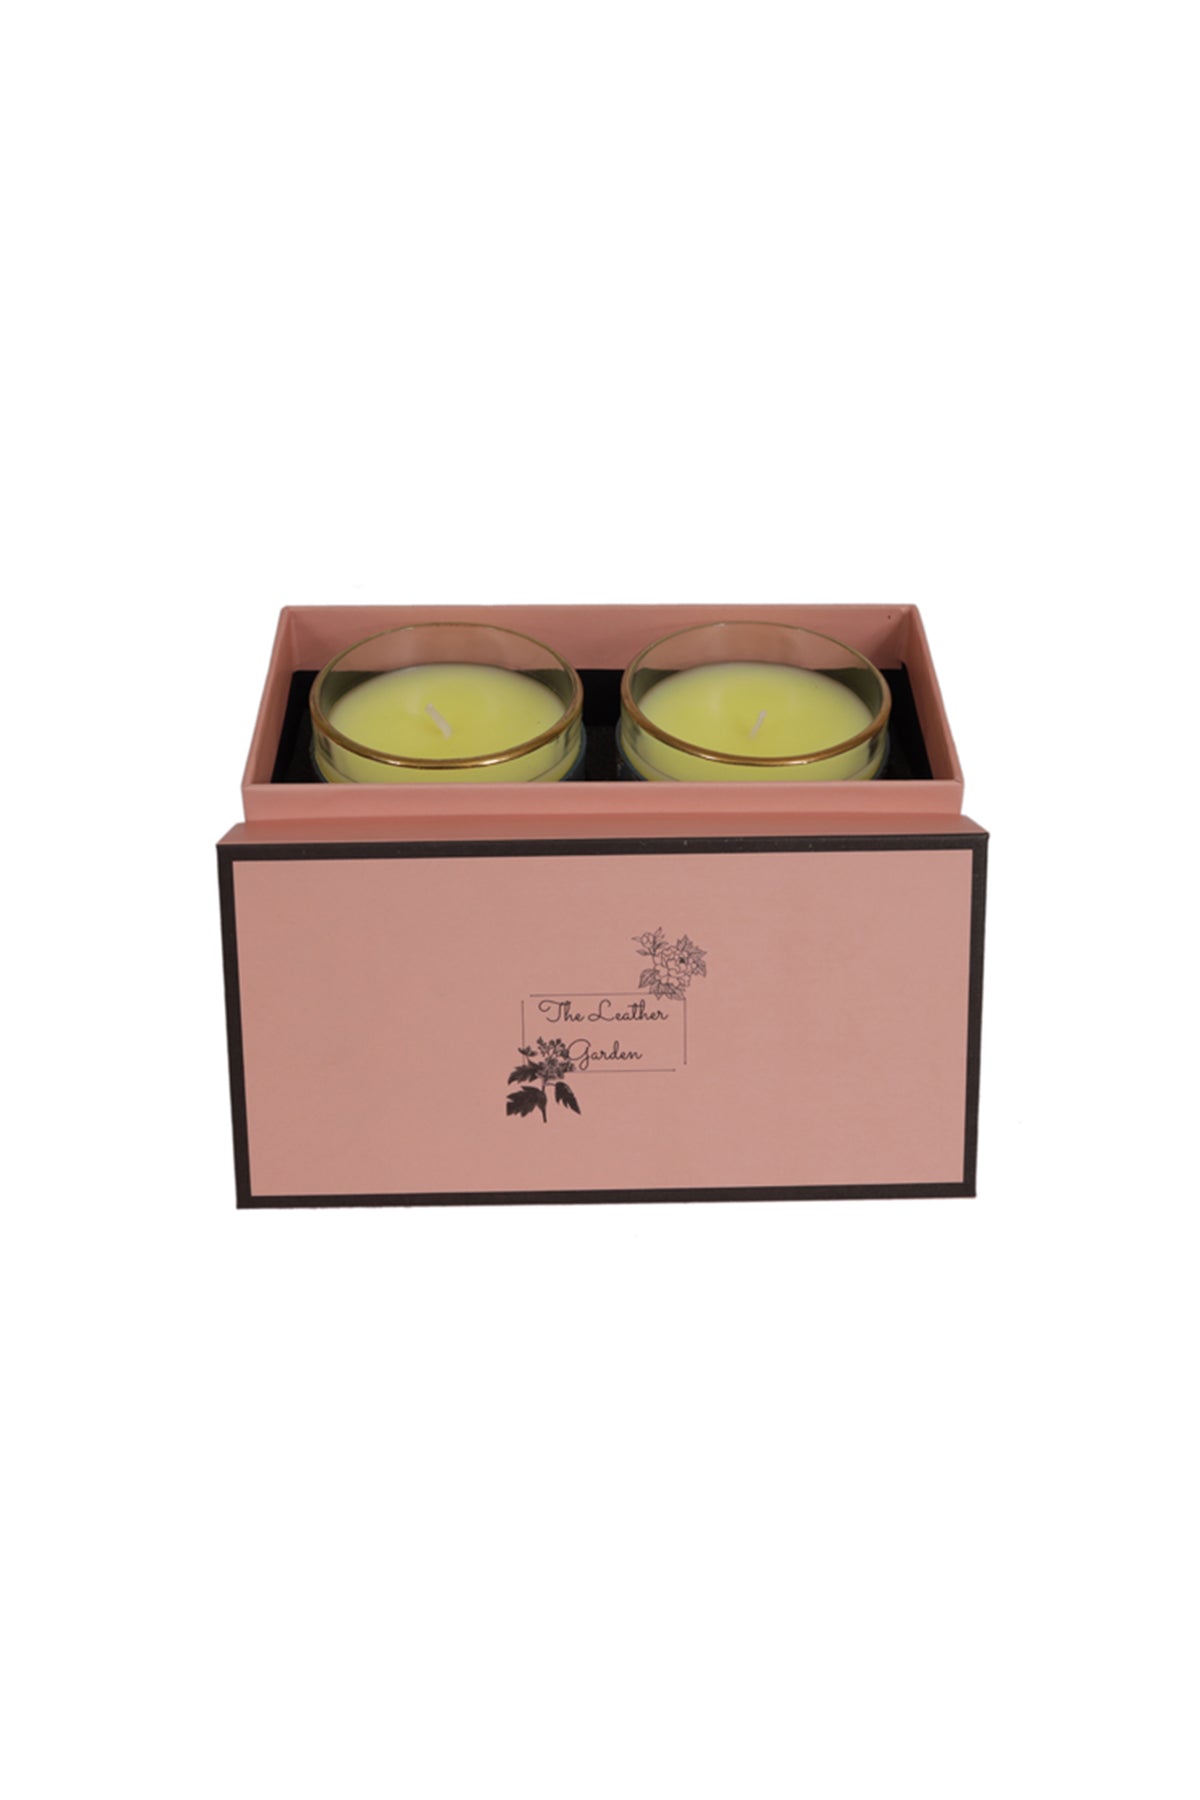 Ocean & Seagrass Candle (Set of 2)